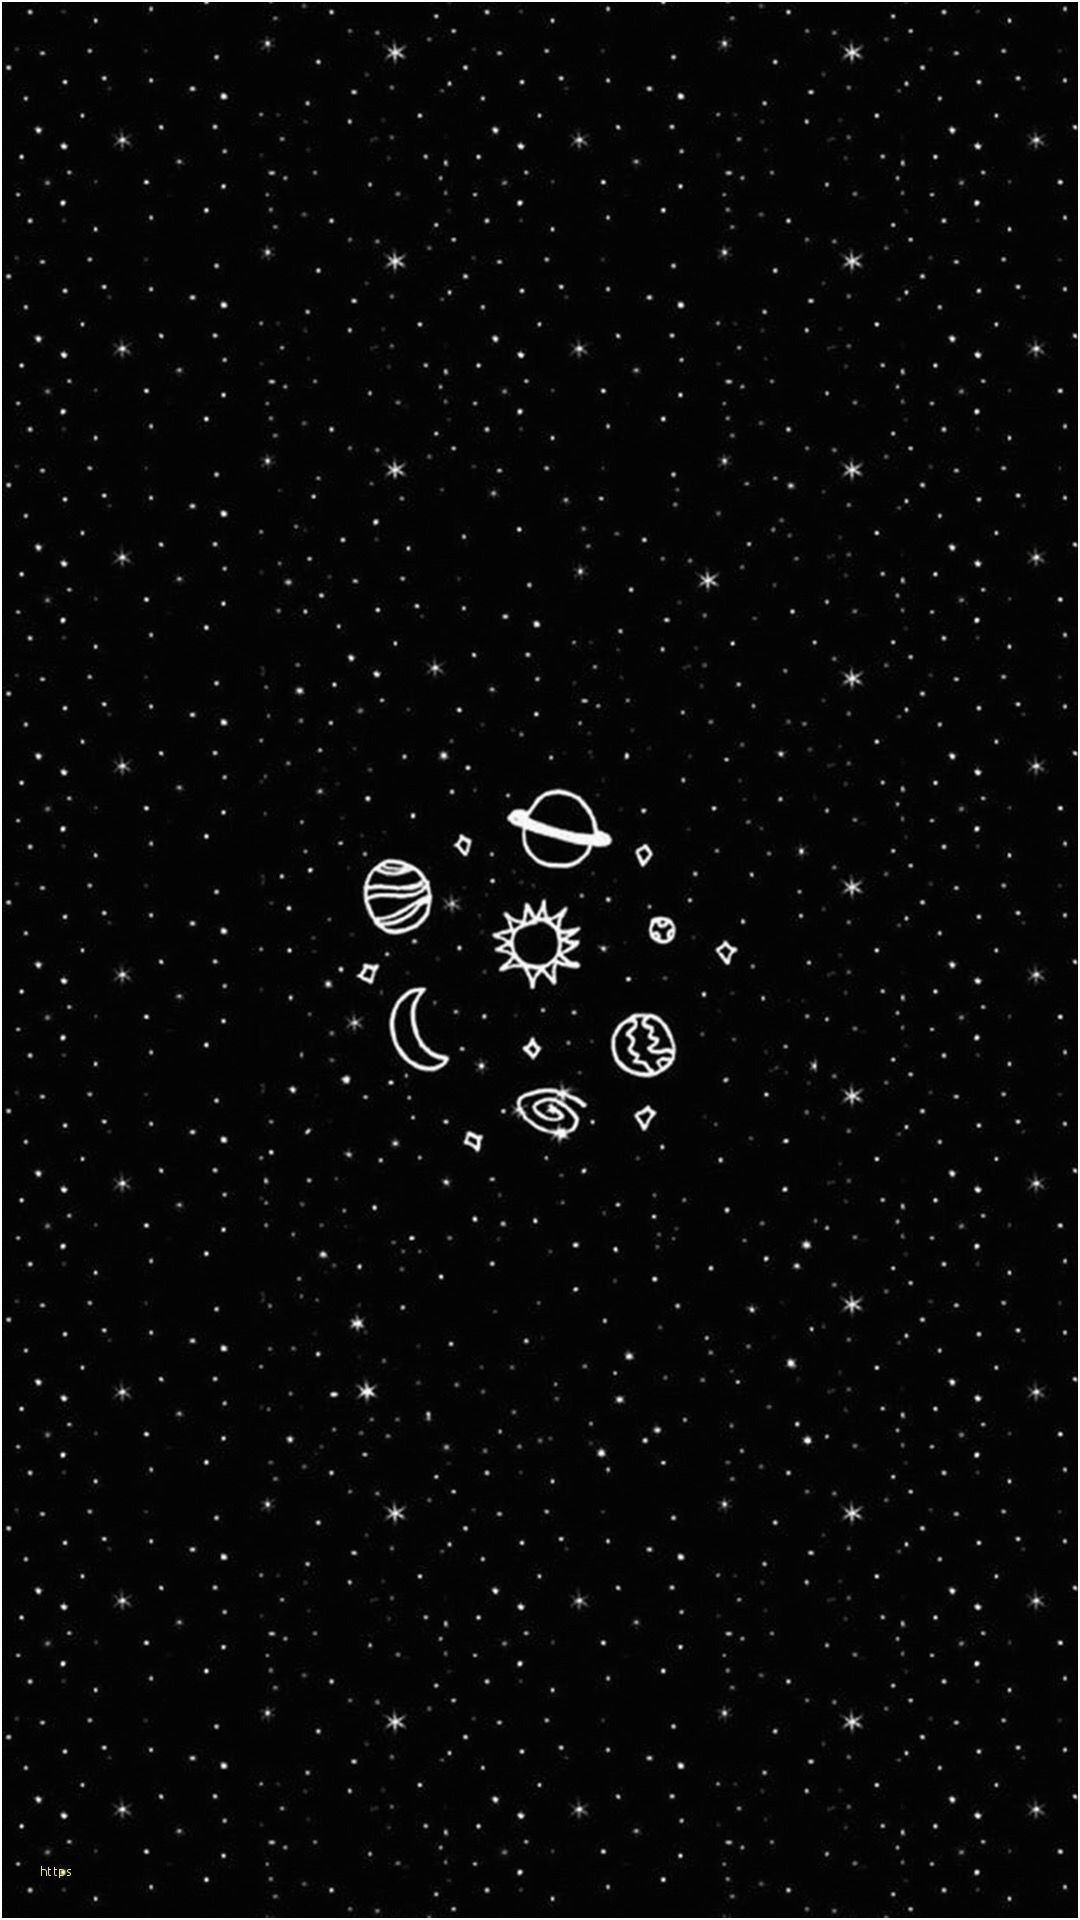 Black and white wallpaper, aesthetic, phone background, galaxy, stars, planets - Black heart